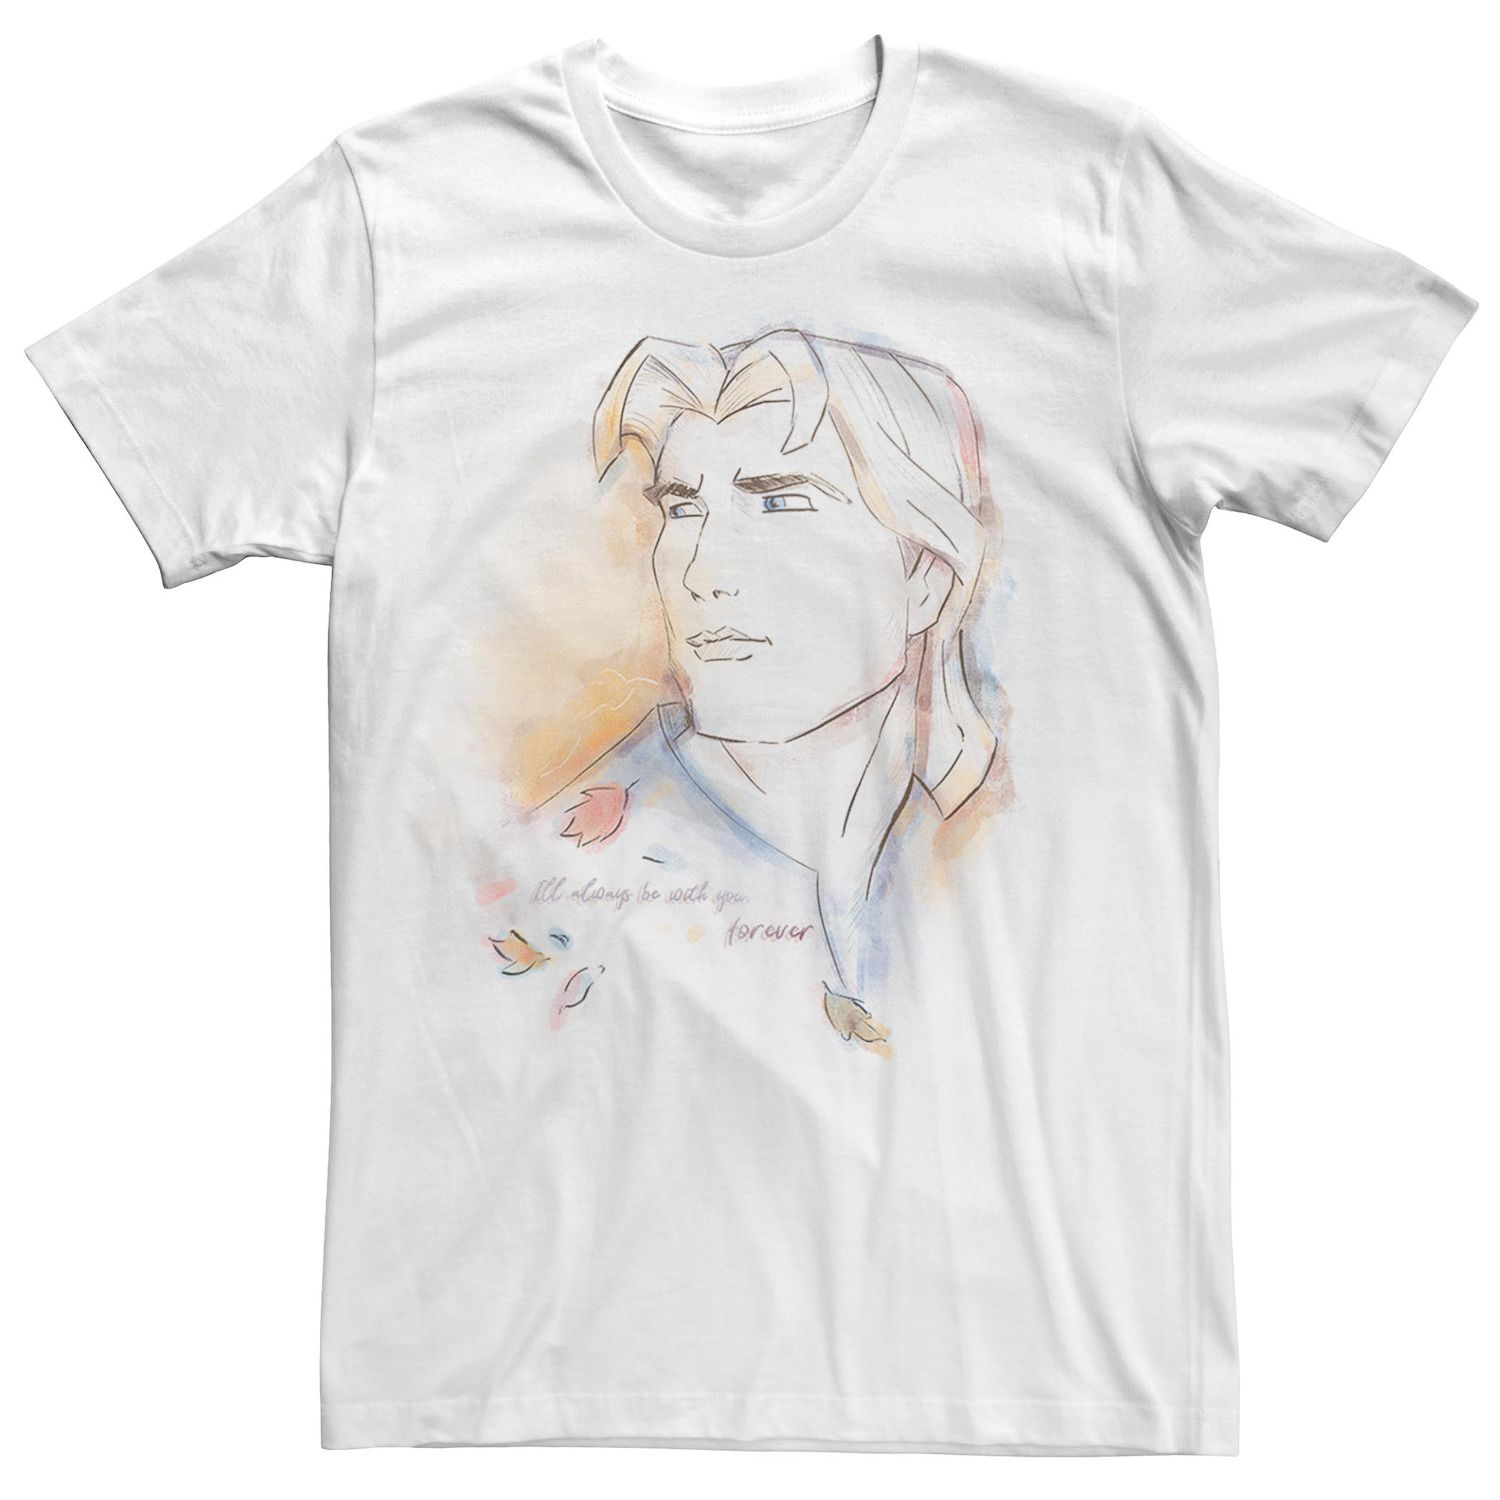 Image for Licensed Character Men's Disney Pocahontas John Smith Watercolor Portrait Tee at Kohl's.